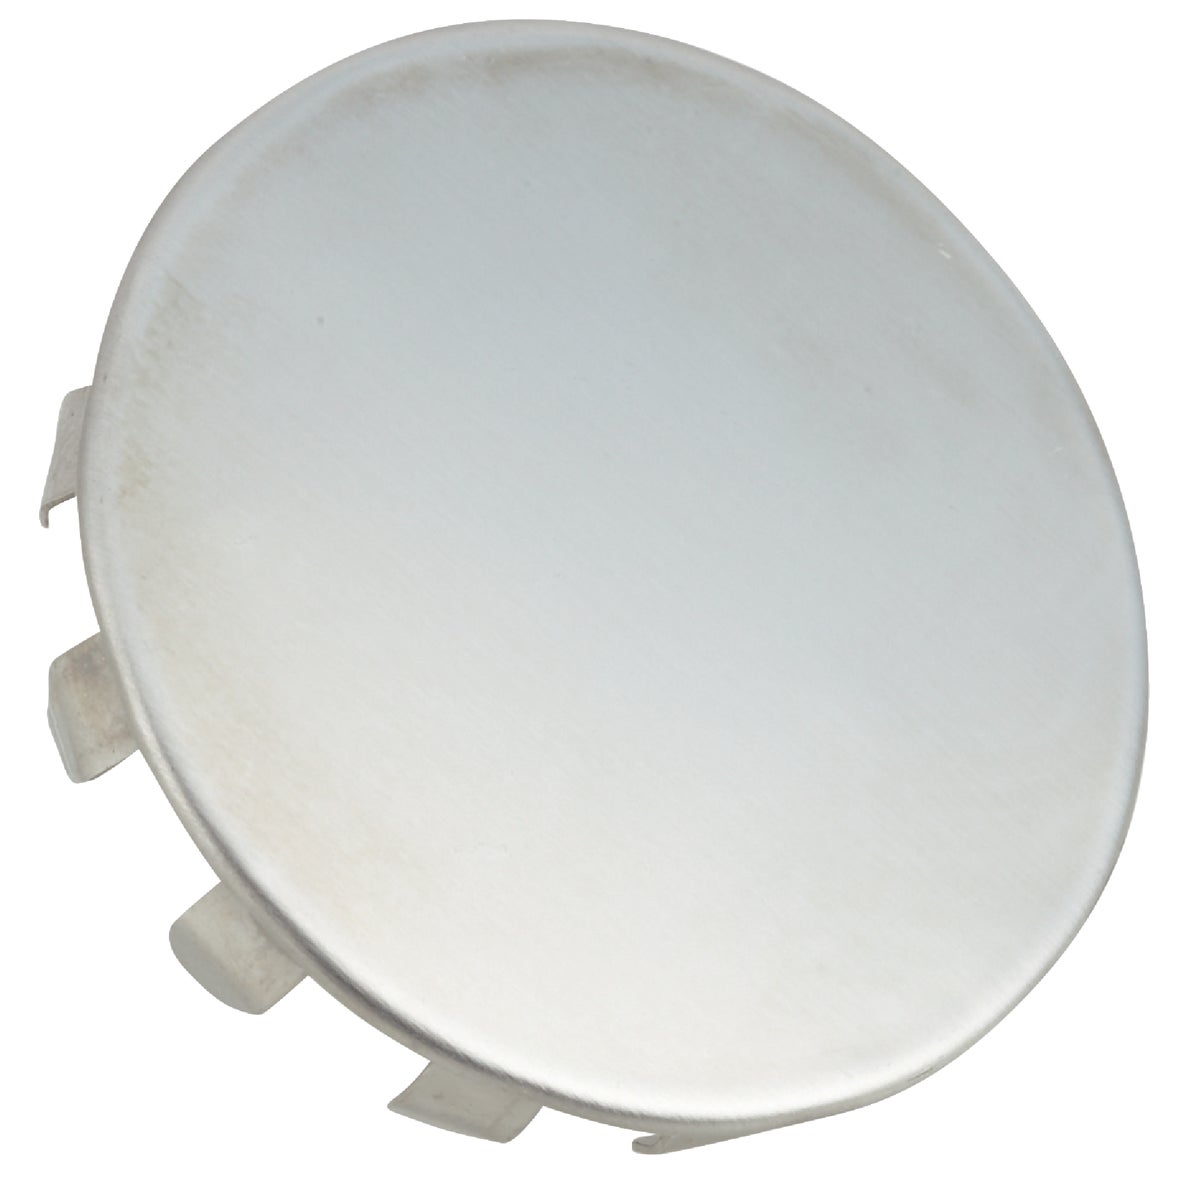 Item 498947, Snap-in 1-1/2" sink hole cover. Covers most sink holes.